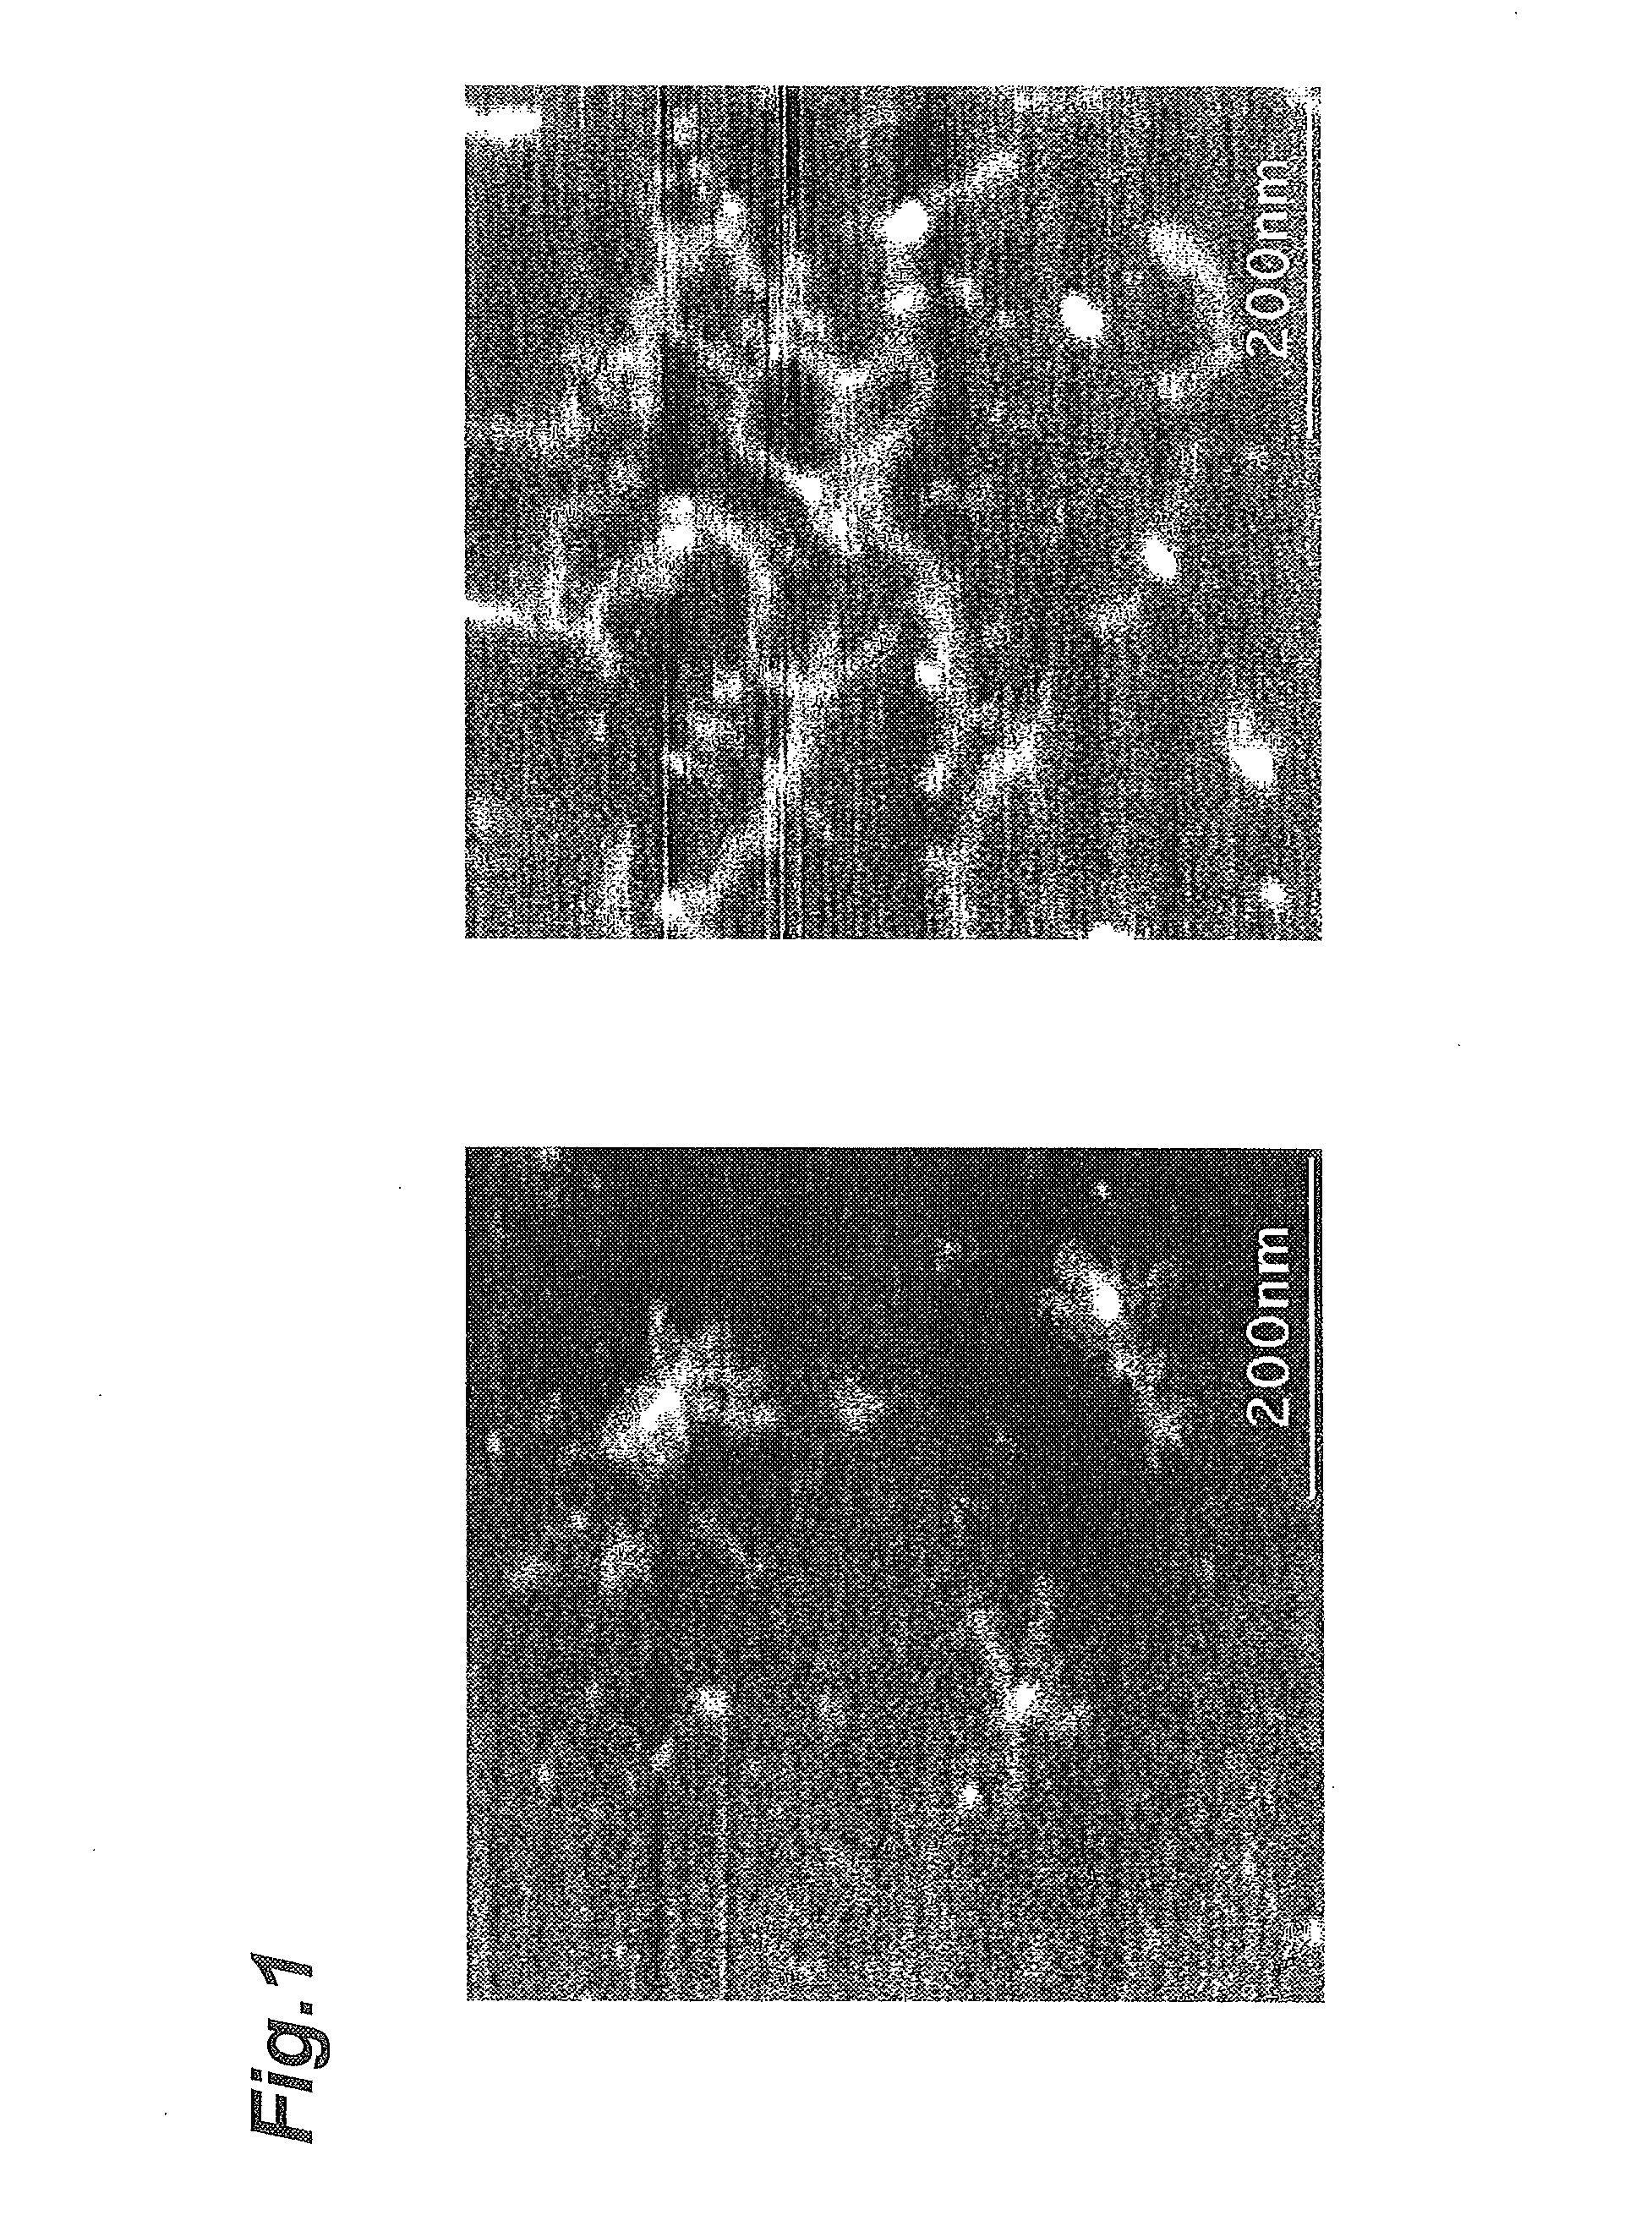 Pectic polysaccharide and method for producing same